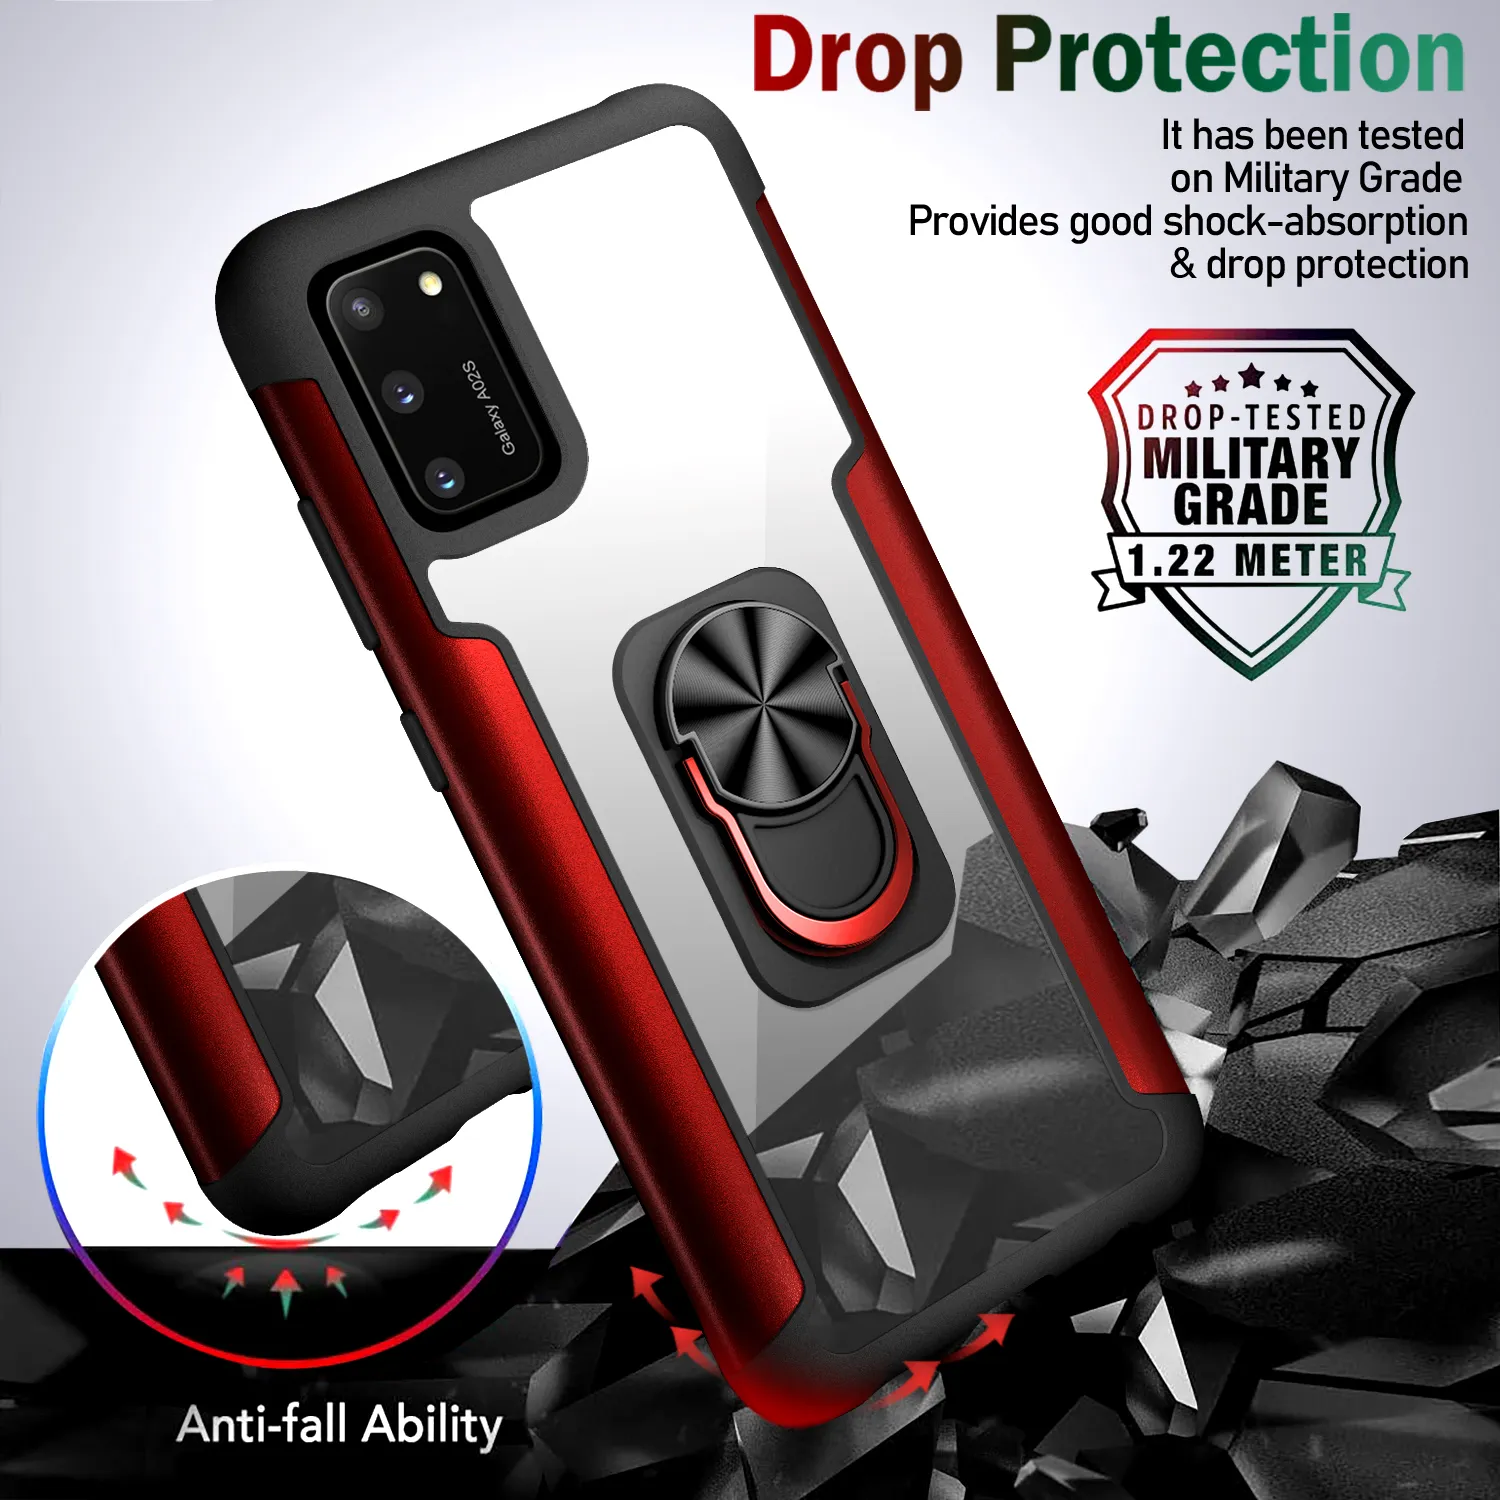 Magnetic Ring Holder Armor Shockproof Cases For Samsung Galaxy A02S Metal Bumper Soft TPU Frame Hard PC Transpanet Back Cover